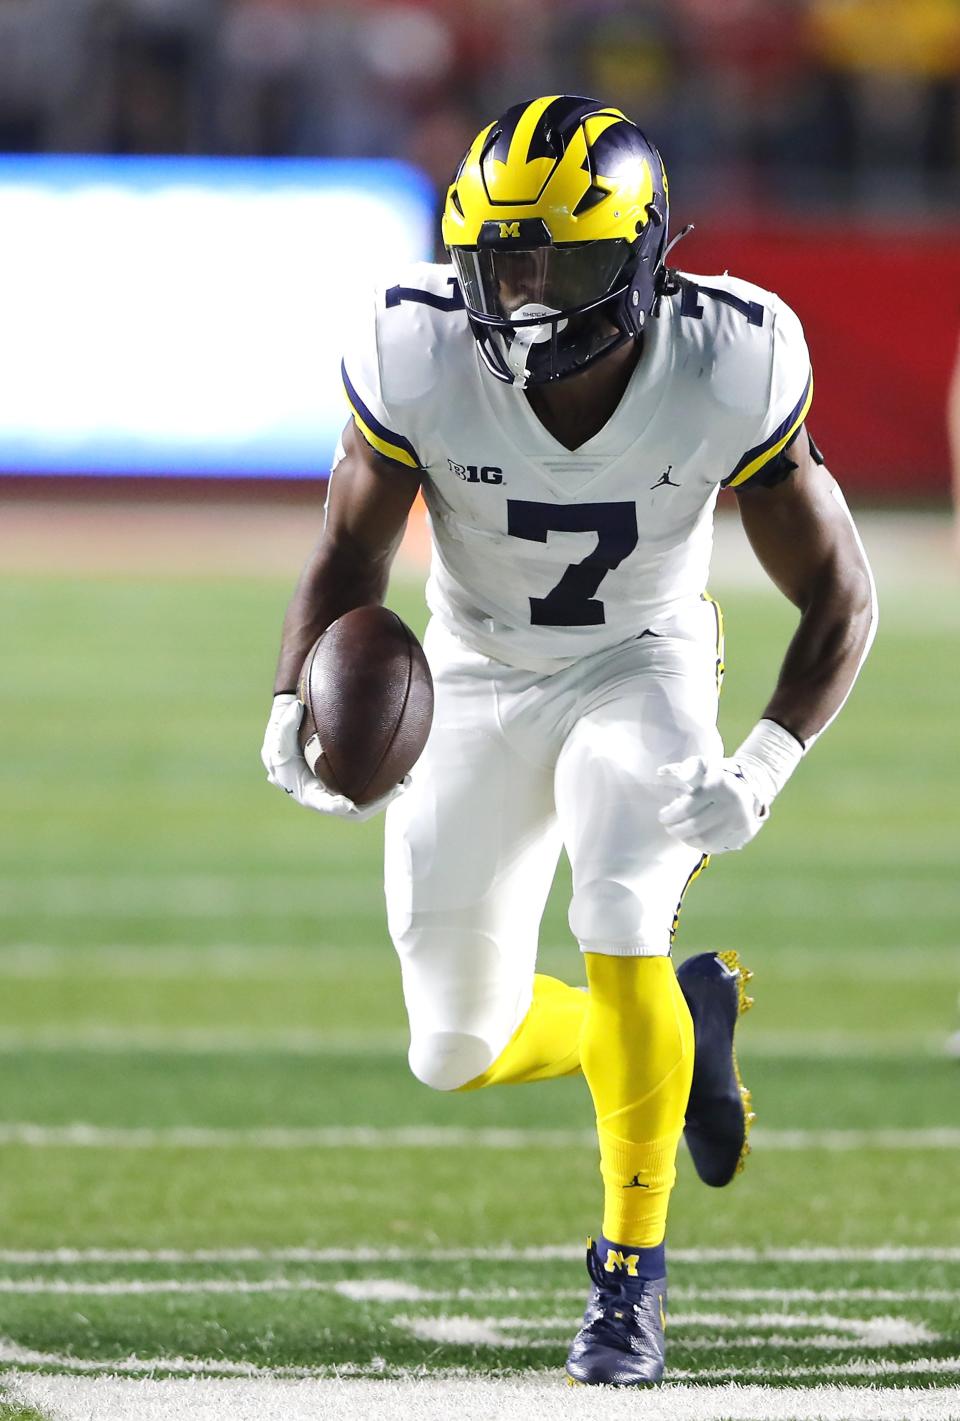 Michigan running back Donovan Edwards rushes against Rutgers during the first half on Saturday, Nov. 5, 2022 in Piscataway, New Jersey.